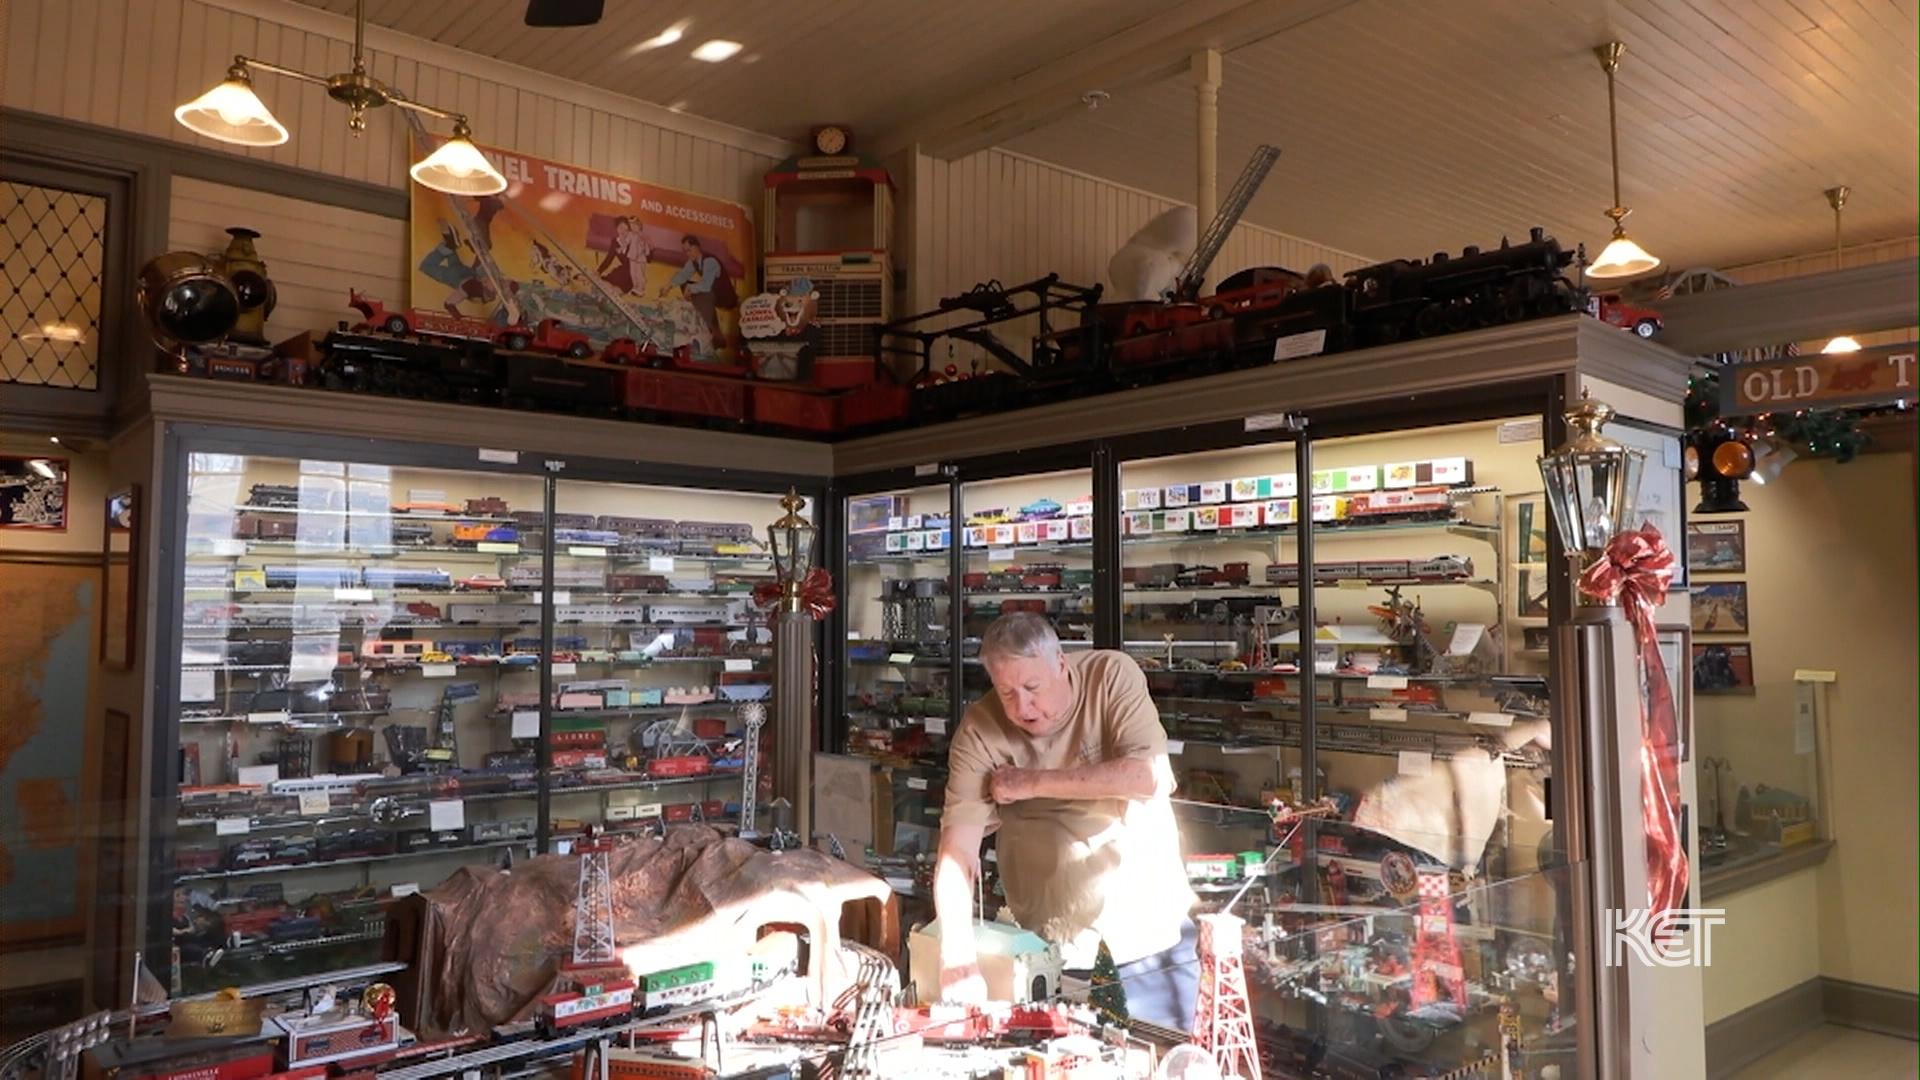 Museum Houses Hundreds of Antique Toy Trains